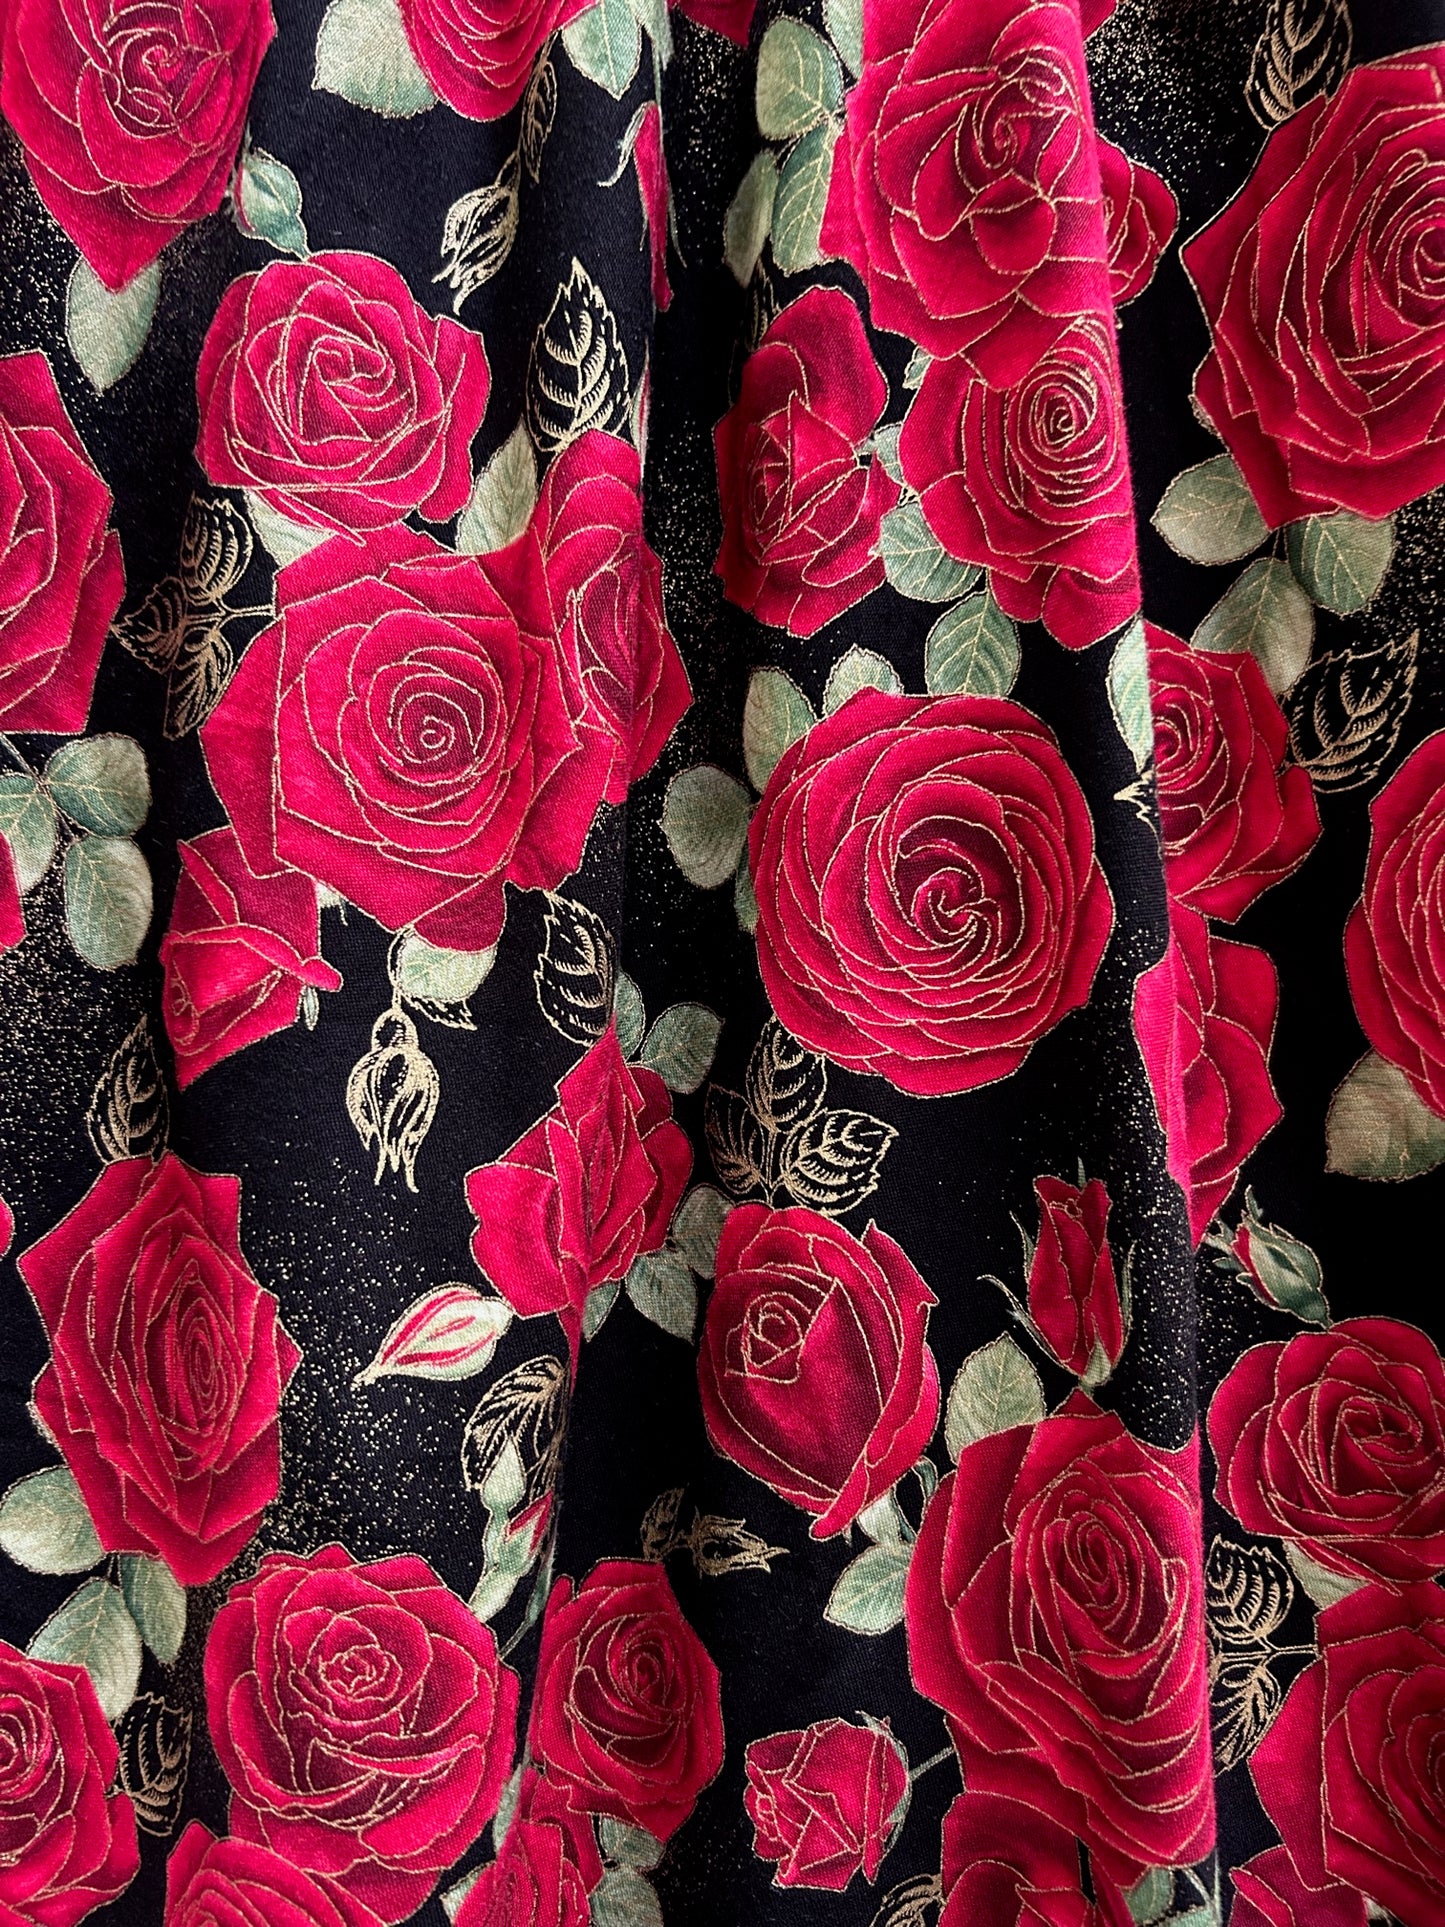 a close up of the fabric showing the red roses on black background and the gold metallic accents